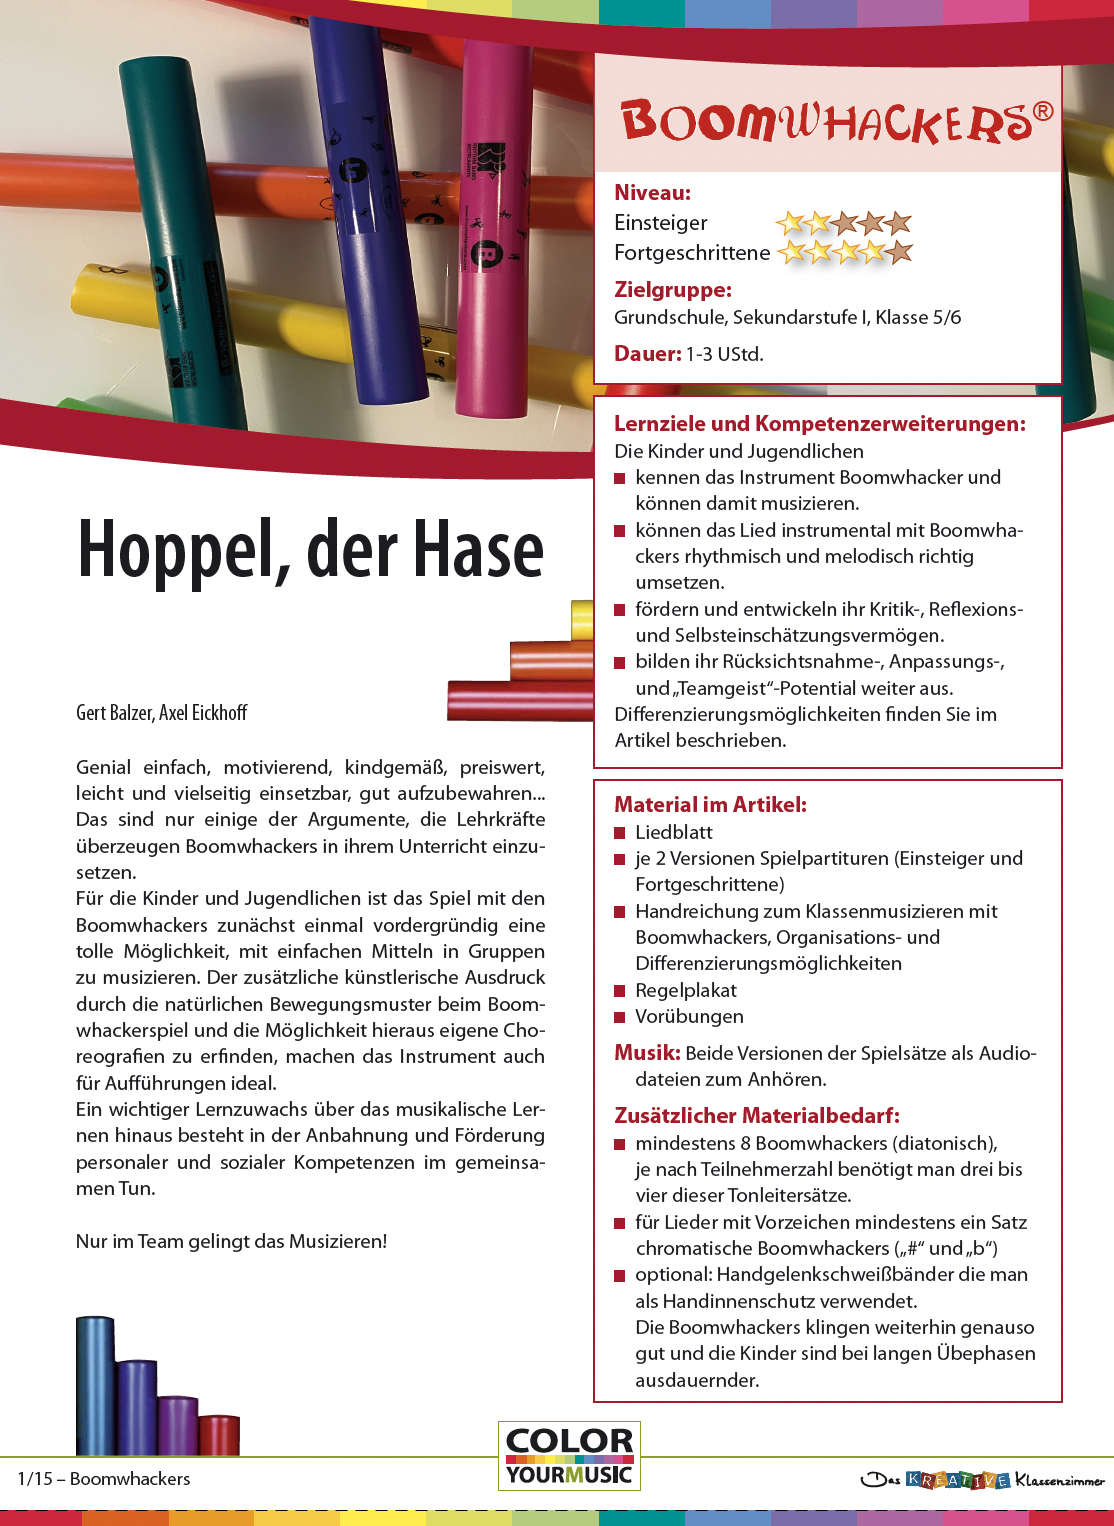 Hoppel, der Hase - Boomwhackers